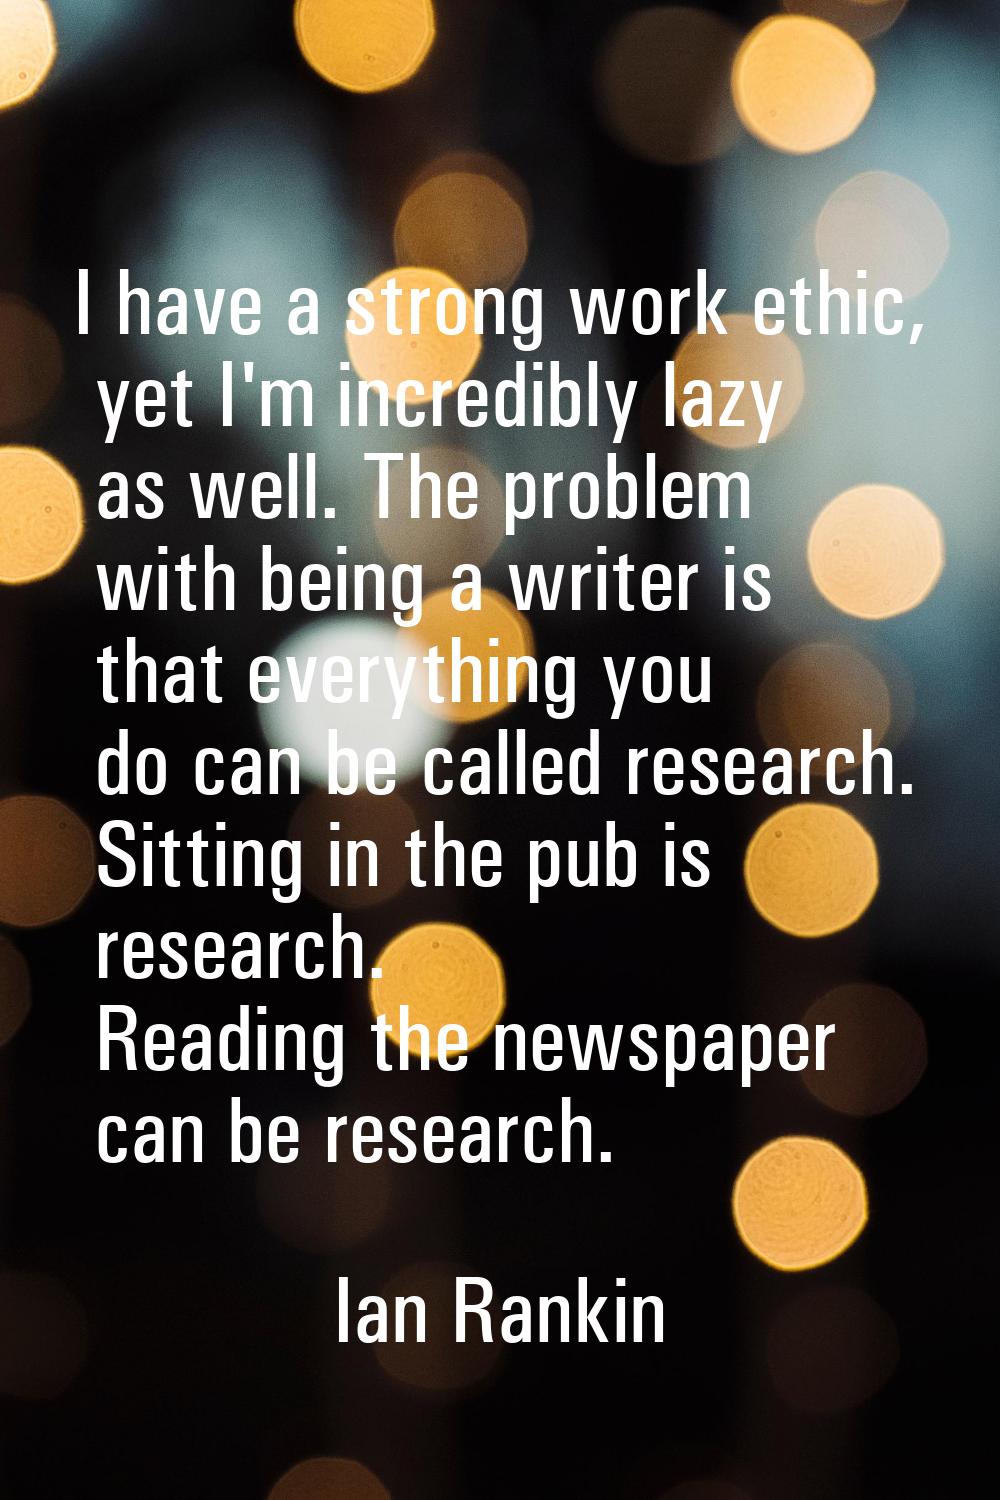 I have a strong work ethic, yet I'm incredibly lazy as well. The problem with being a writer is tha